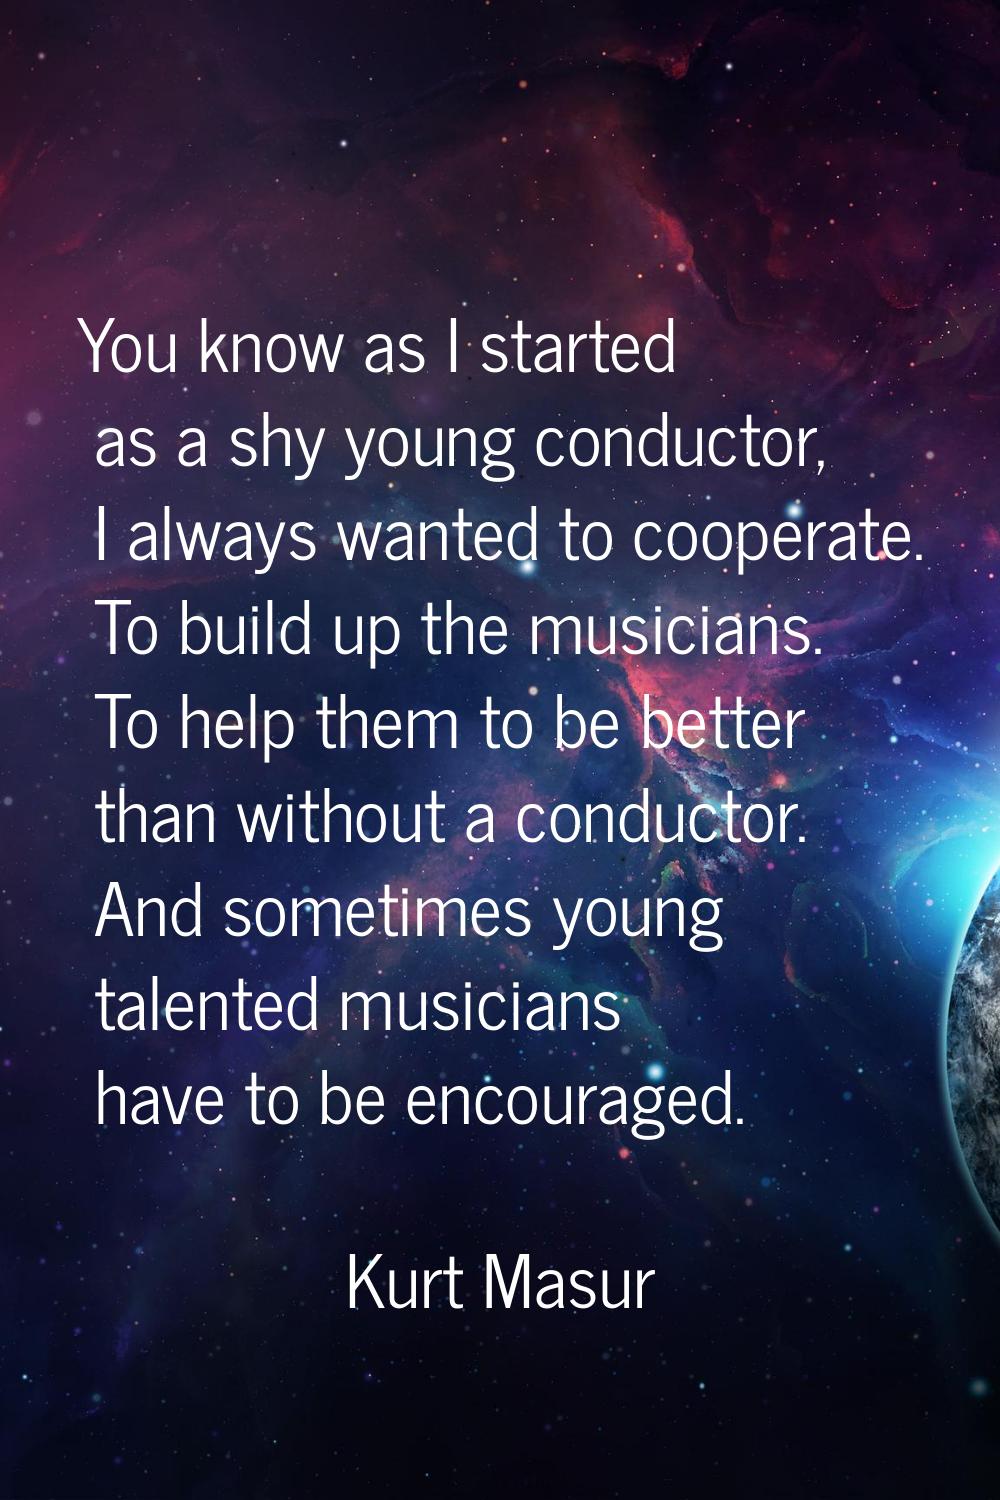 You know as I started as a shy young conductor, I always wanted to cooperate. To build up the music